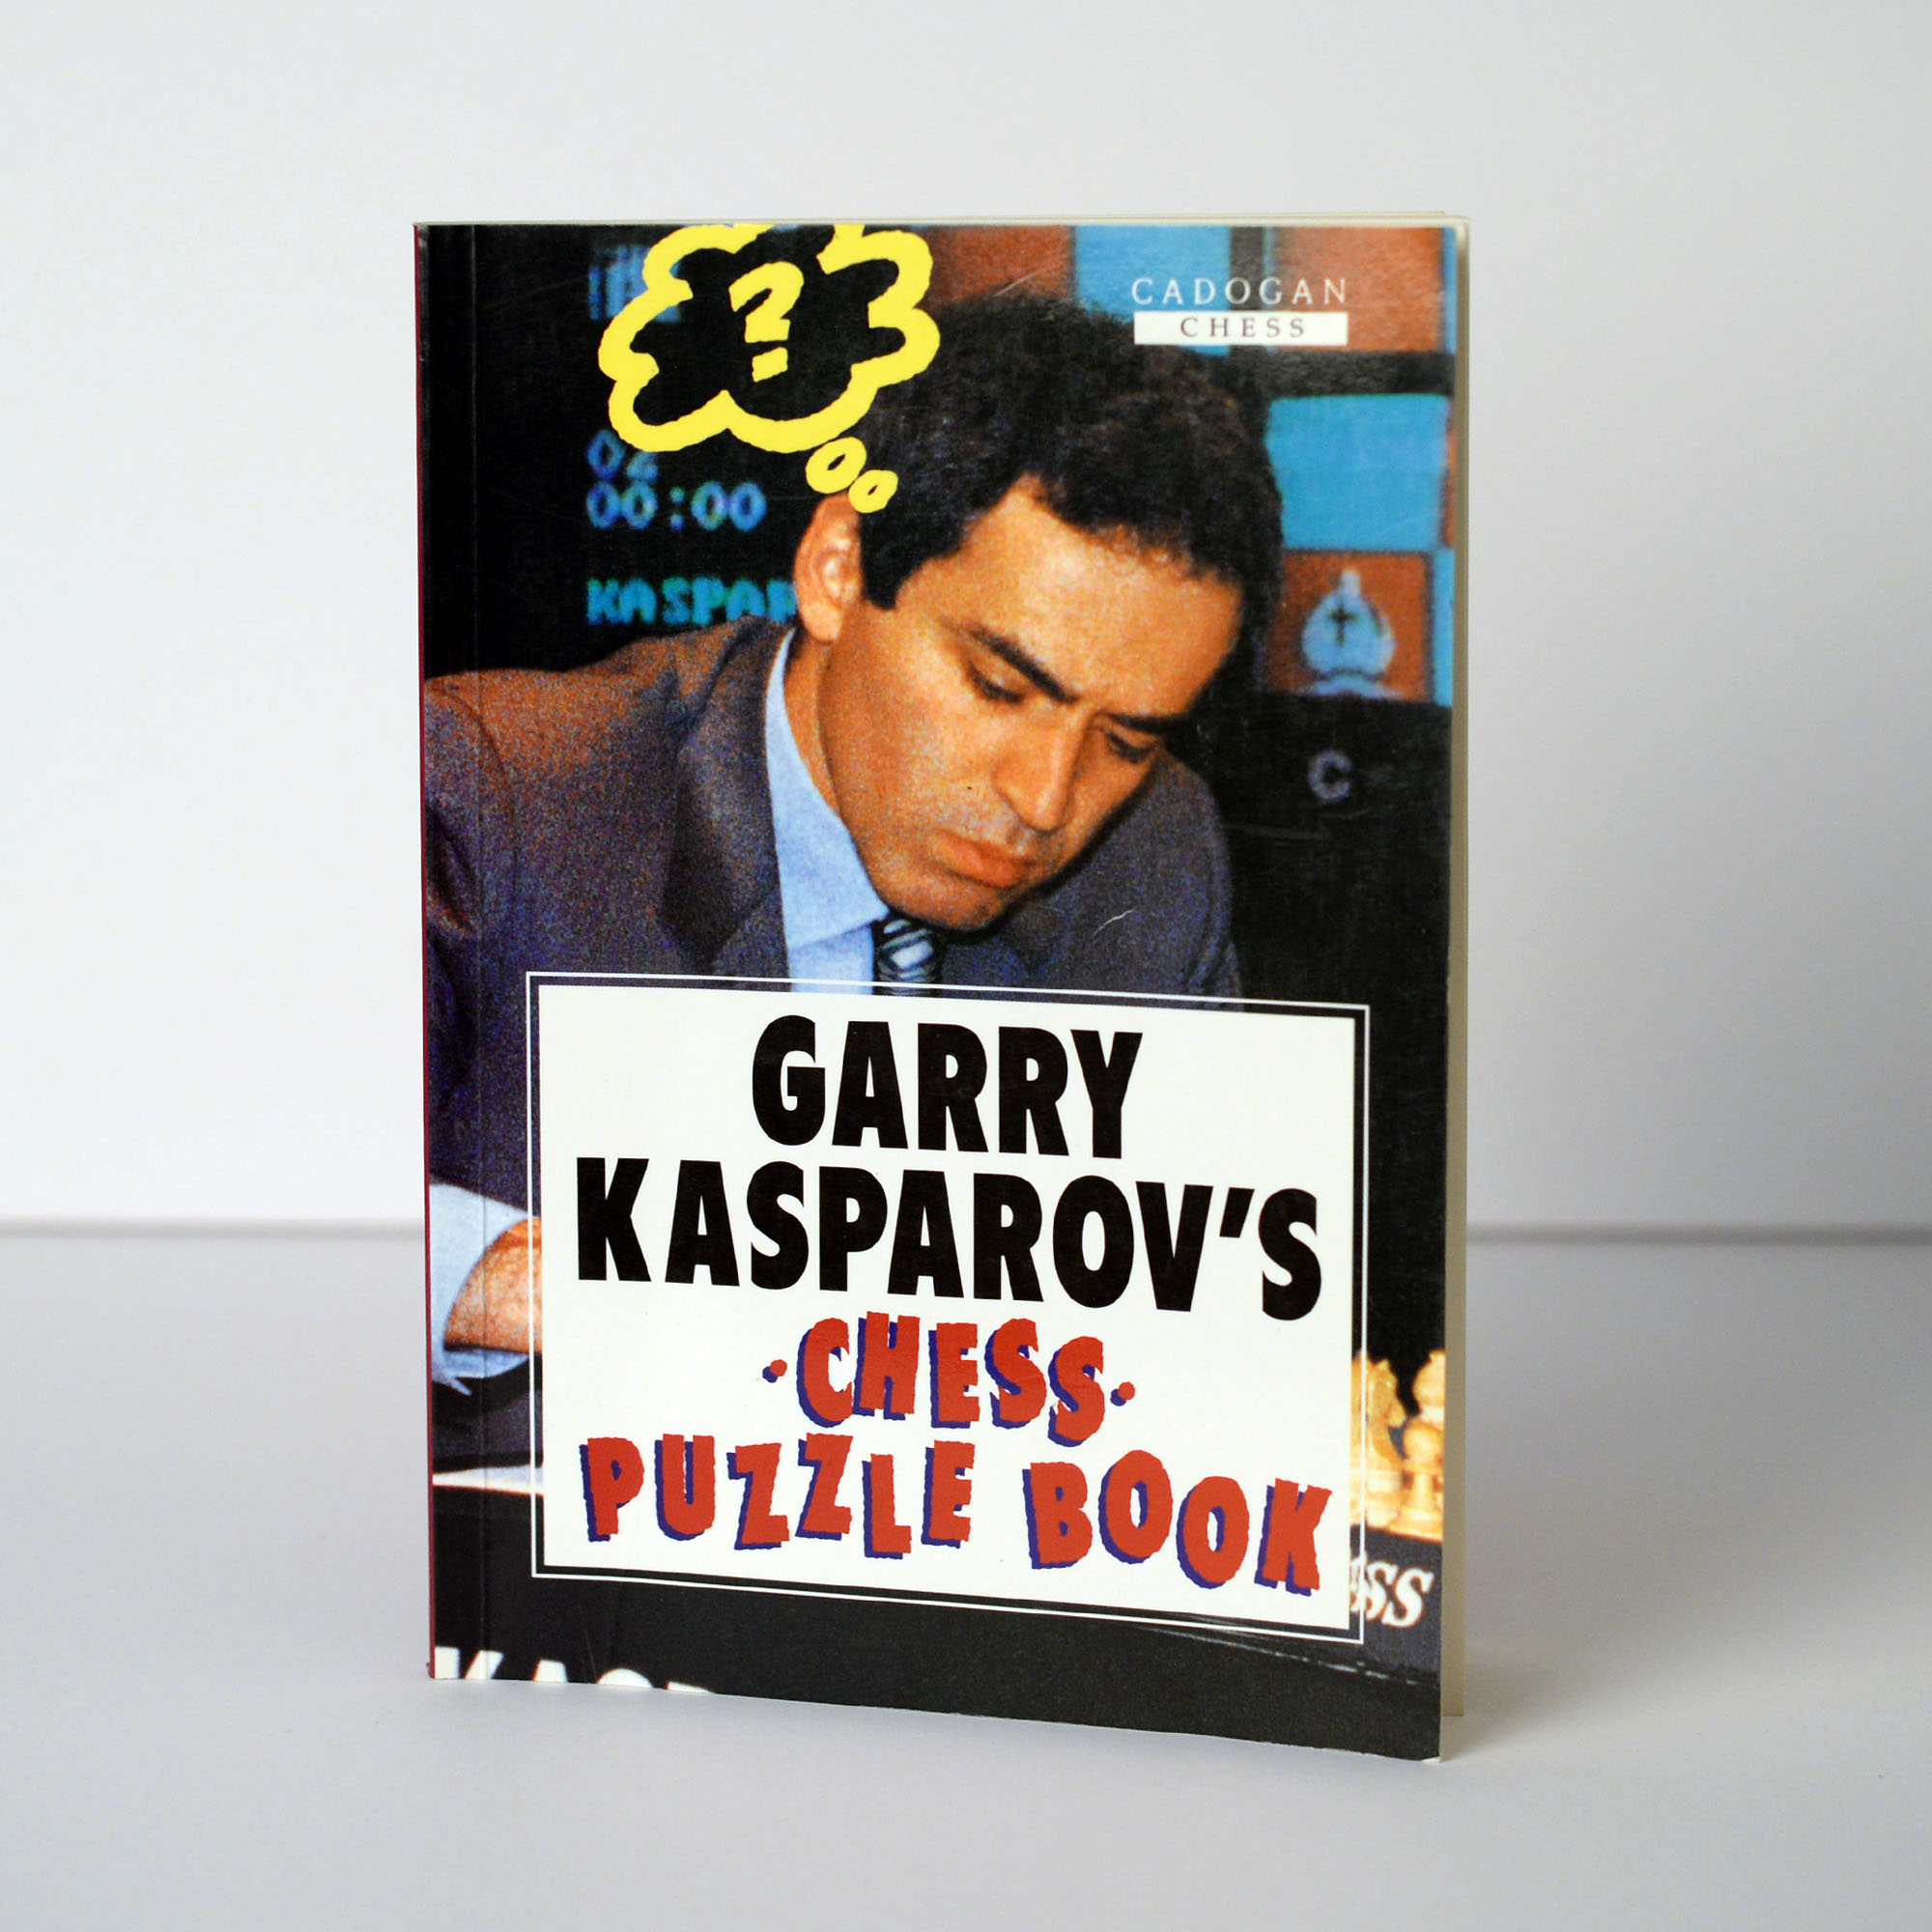 Kasparov Mates in 3 Chess Puzzle - SparkChess